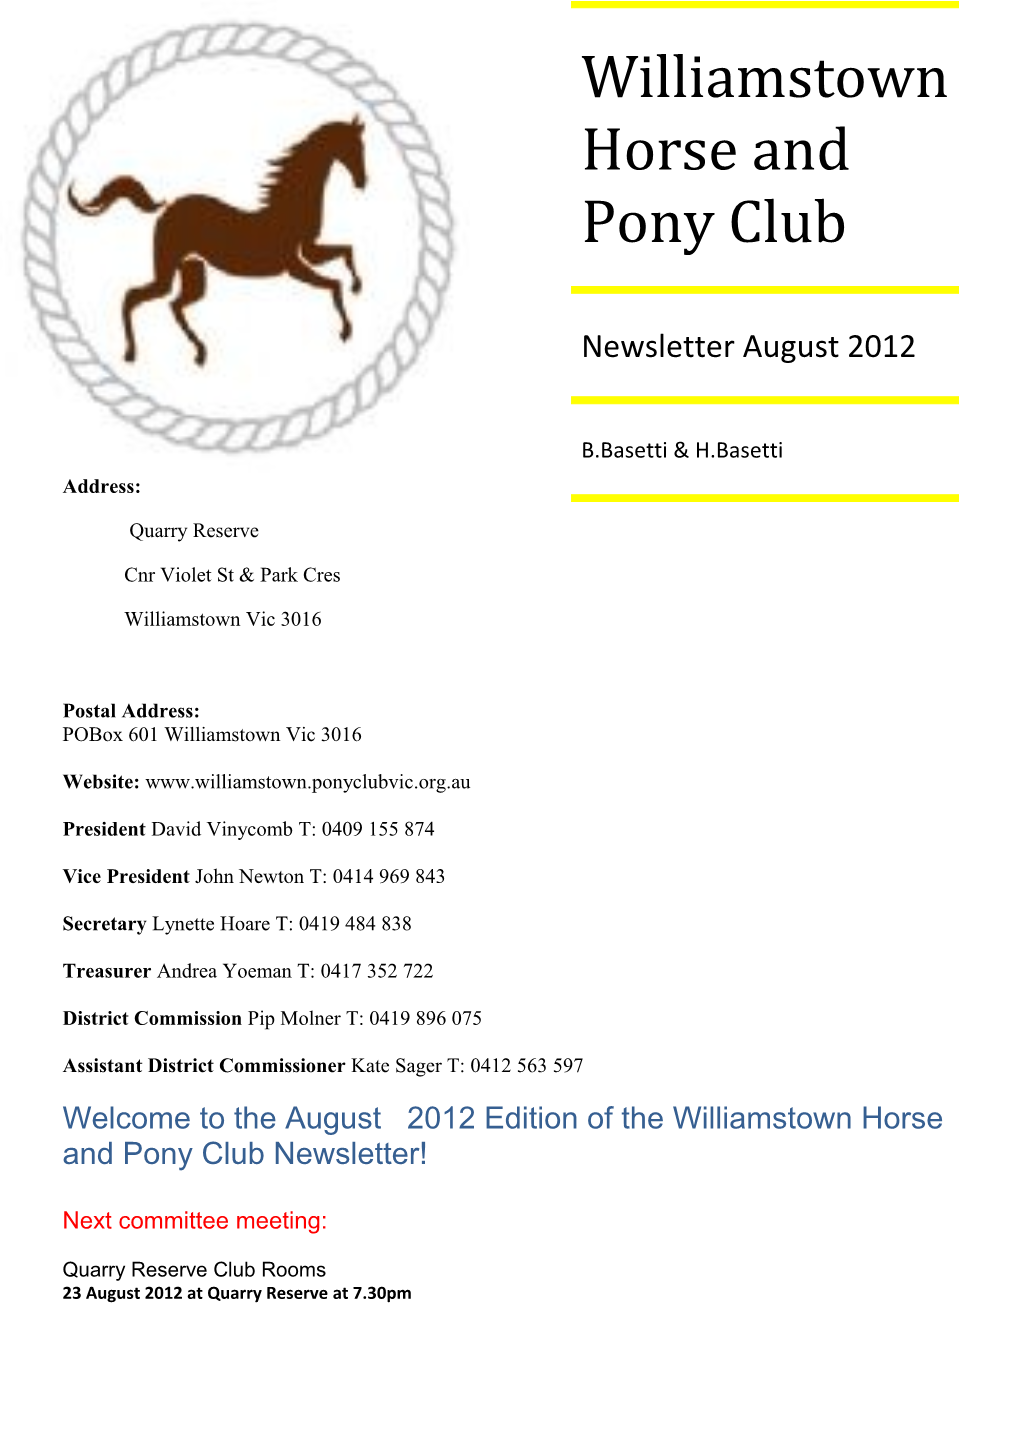 Williamstown Horse and Pony Club